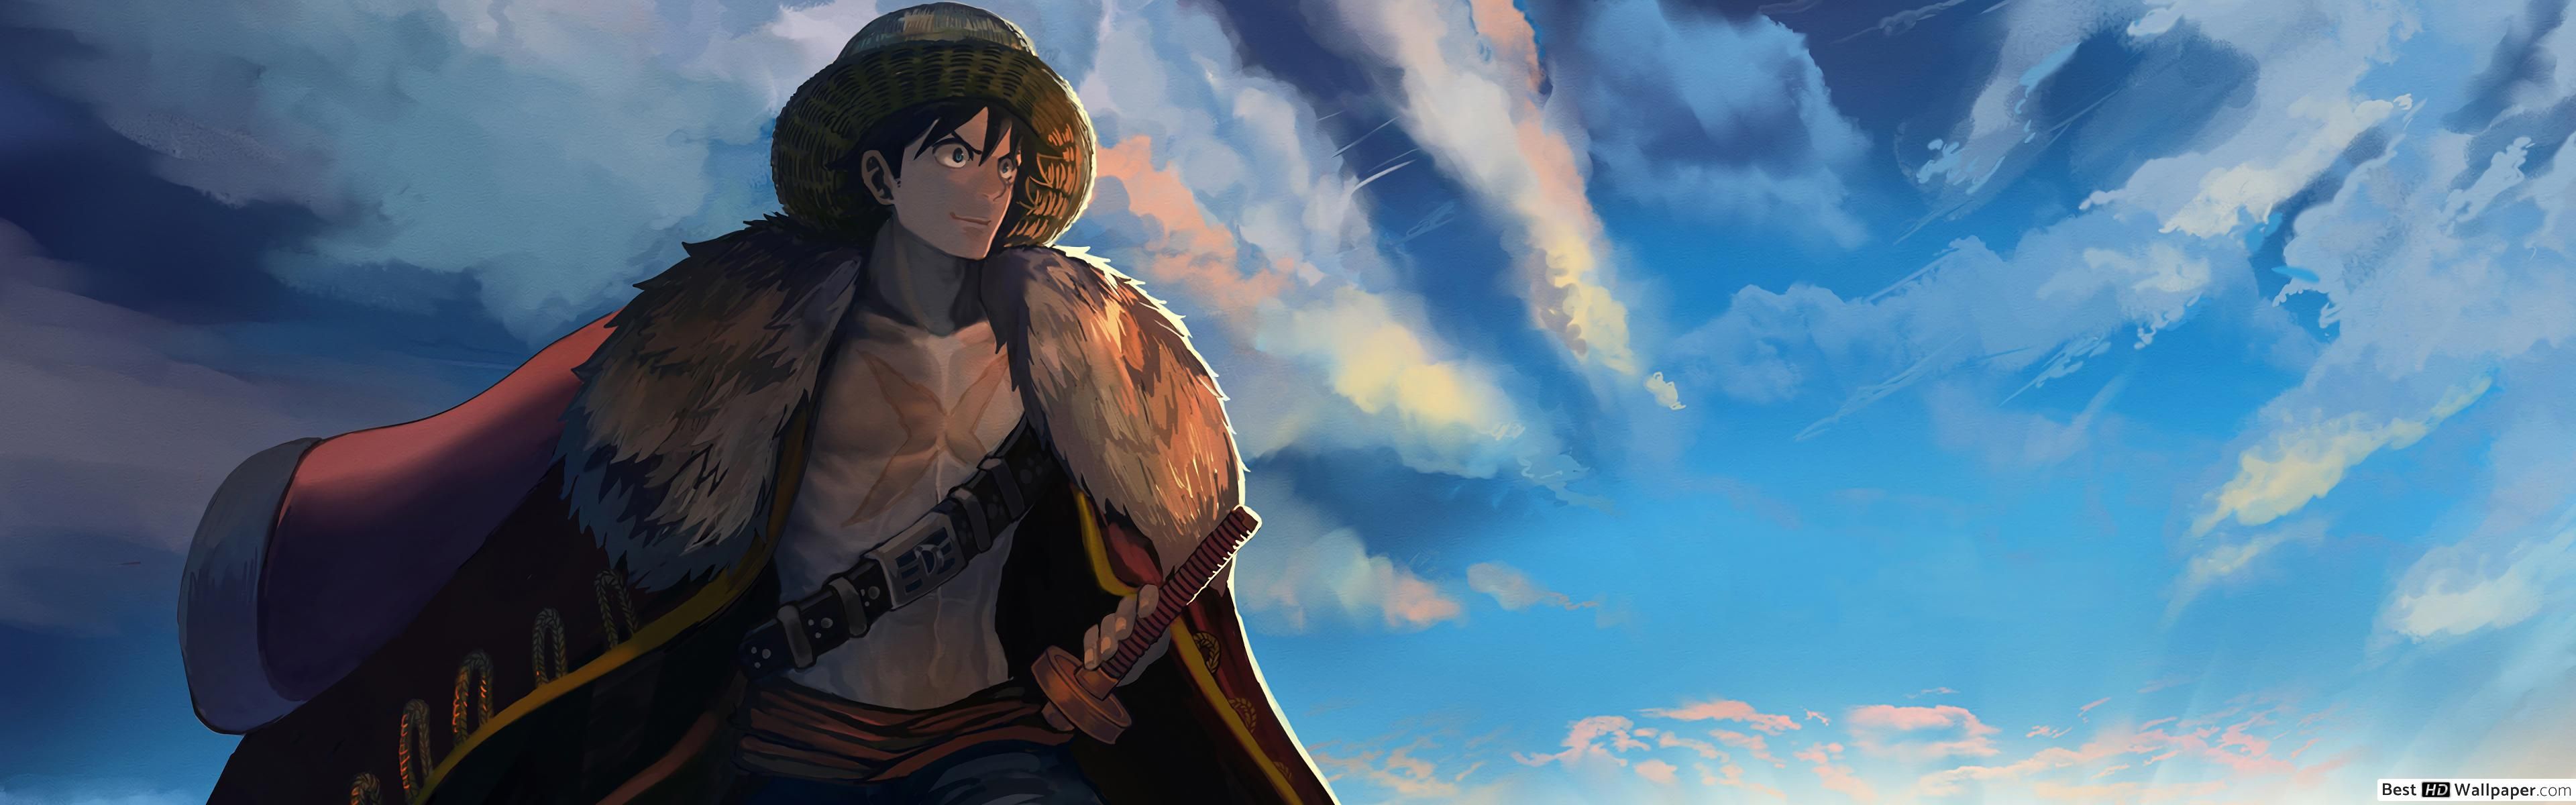 One Piece Dual Monitor Wallpapers - Wallpaper Cave